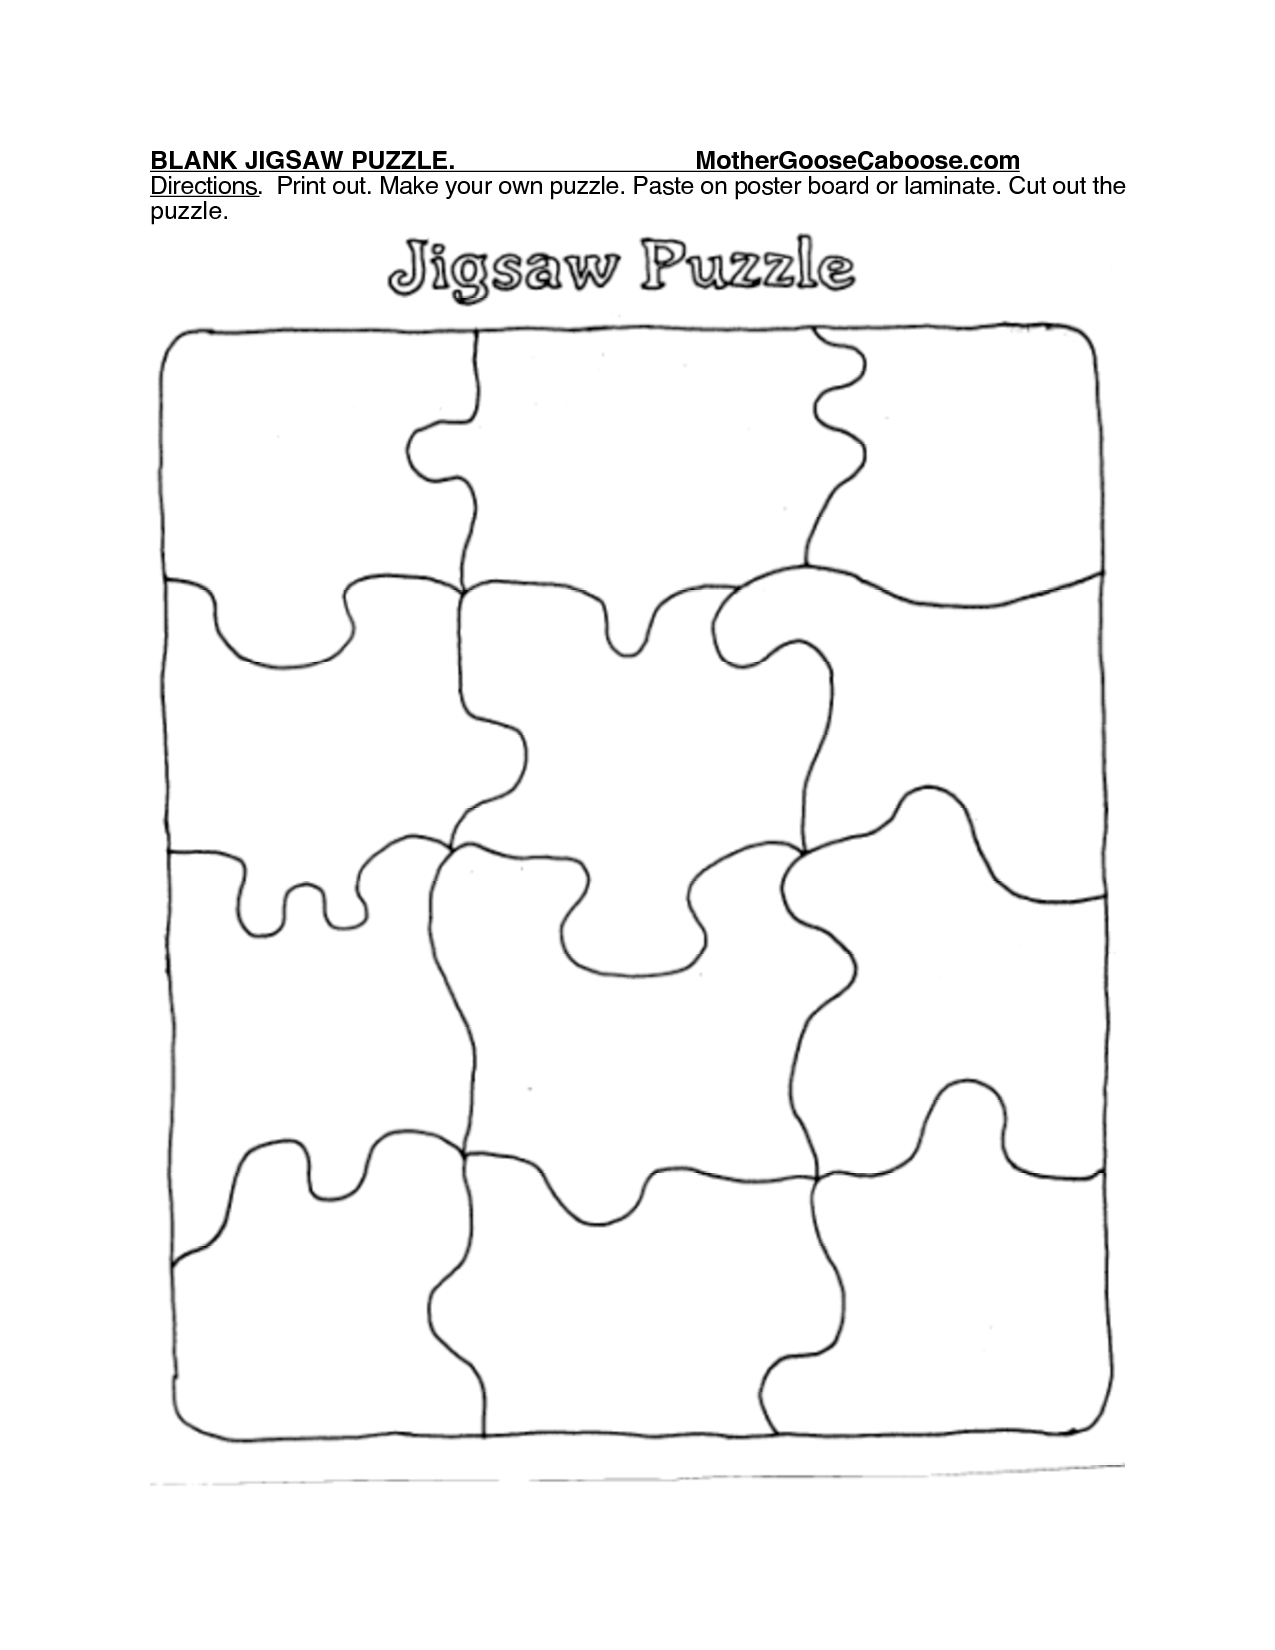 Printable Puzzle Piece Template | Search Results | New Calendar - Printable 8 Piece Jigsaw Puzzle